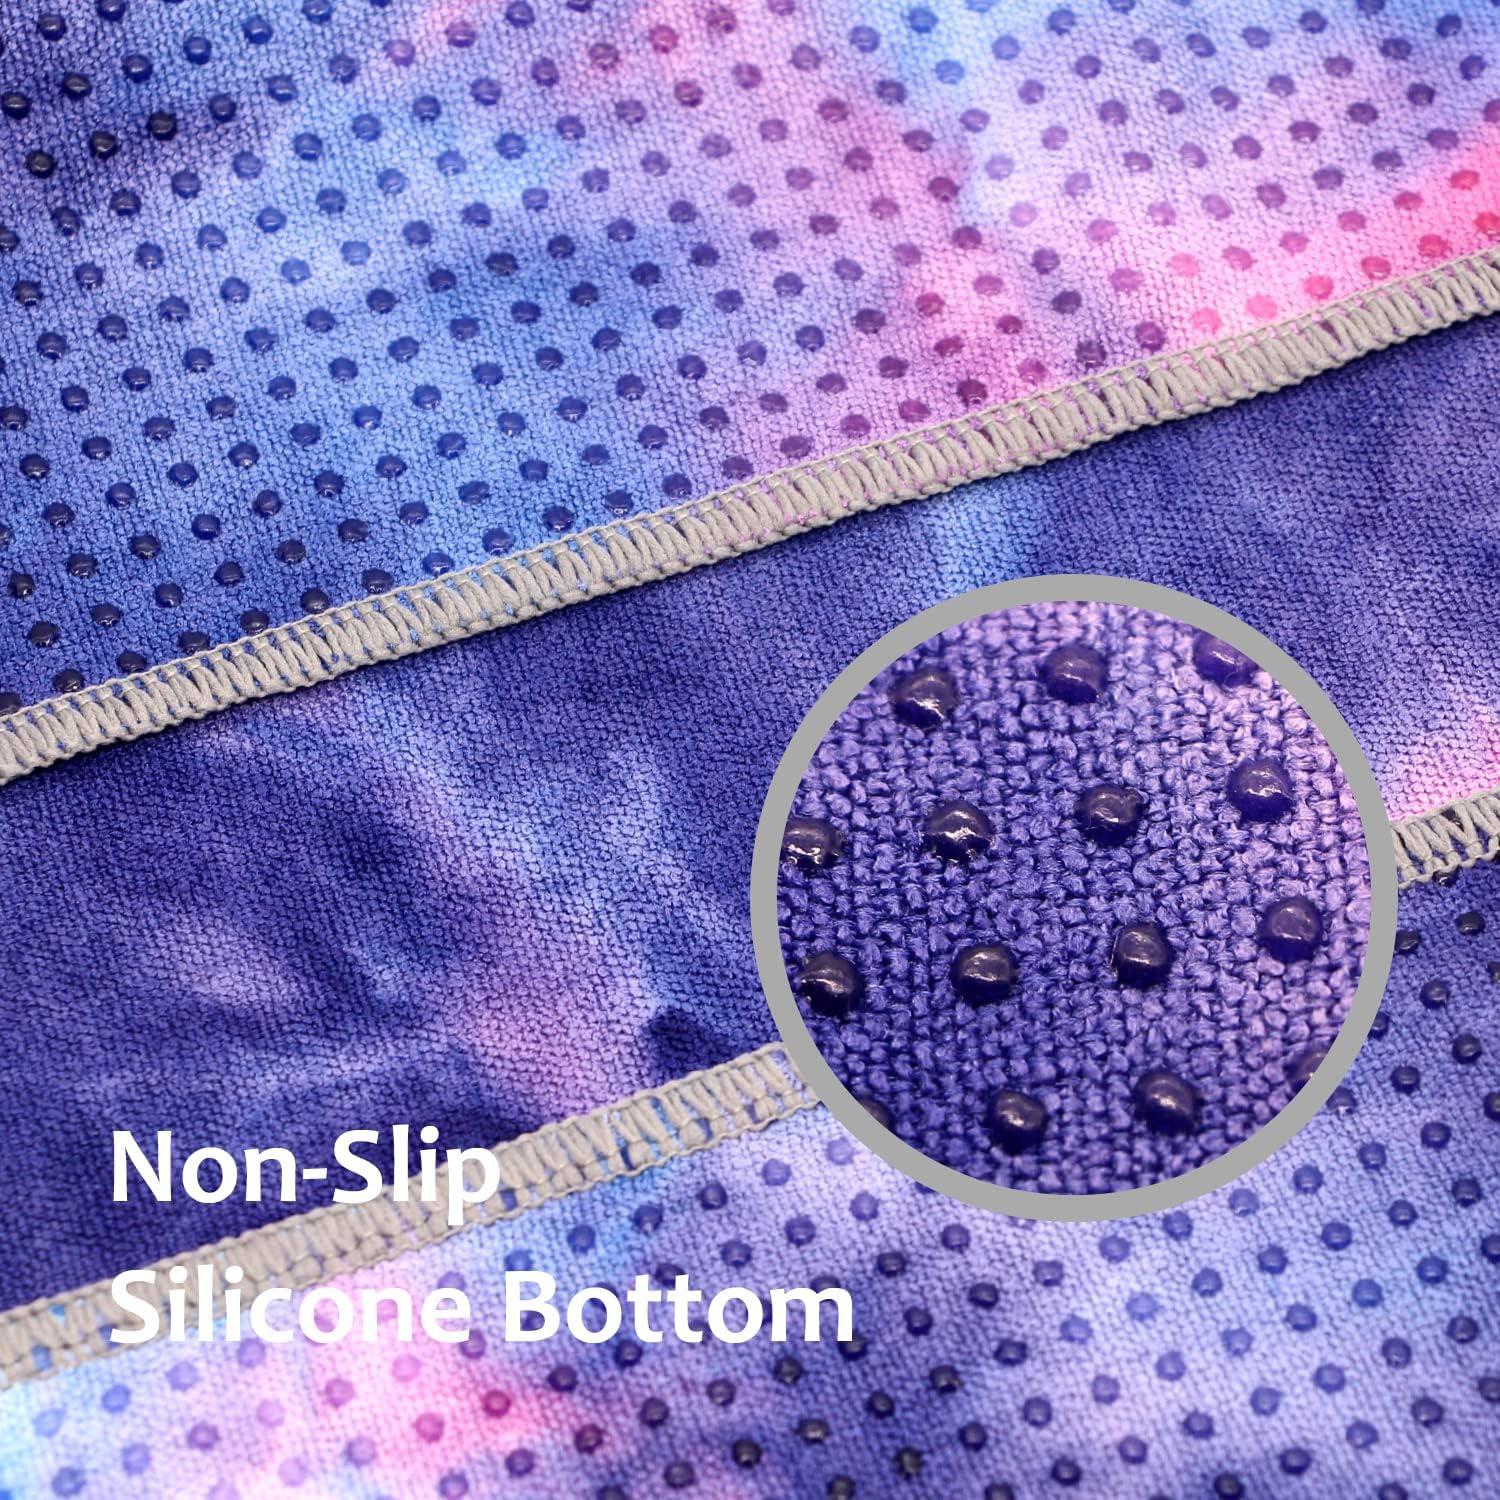 Yoga Towel,Hot Yoga Mat Towel with Grip Dots Sweat Absorbent Non-Slip for  Hot Yoga, Pilates and Workout 24 x72, Purple & Blue